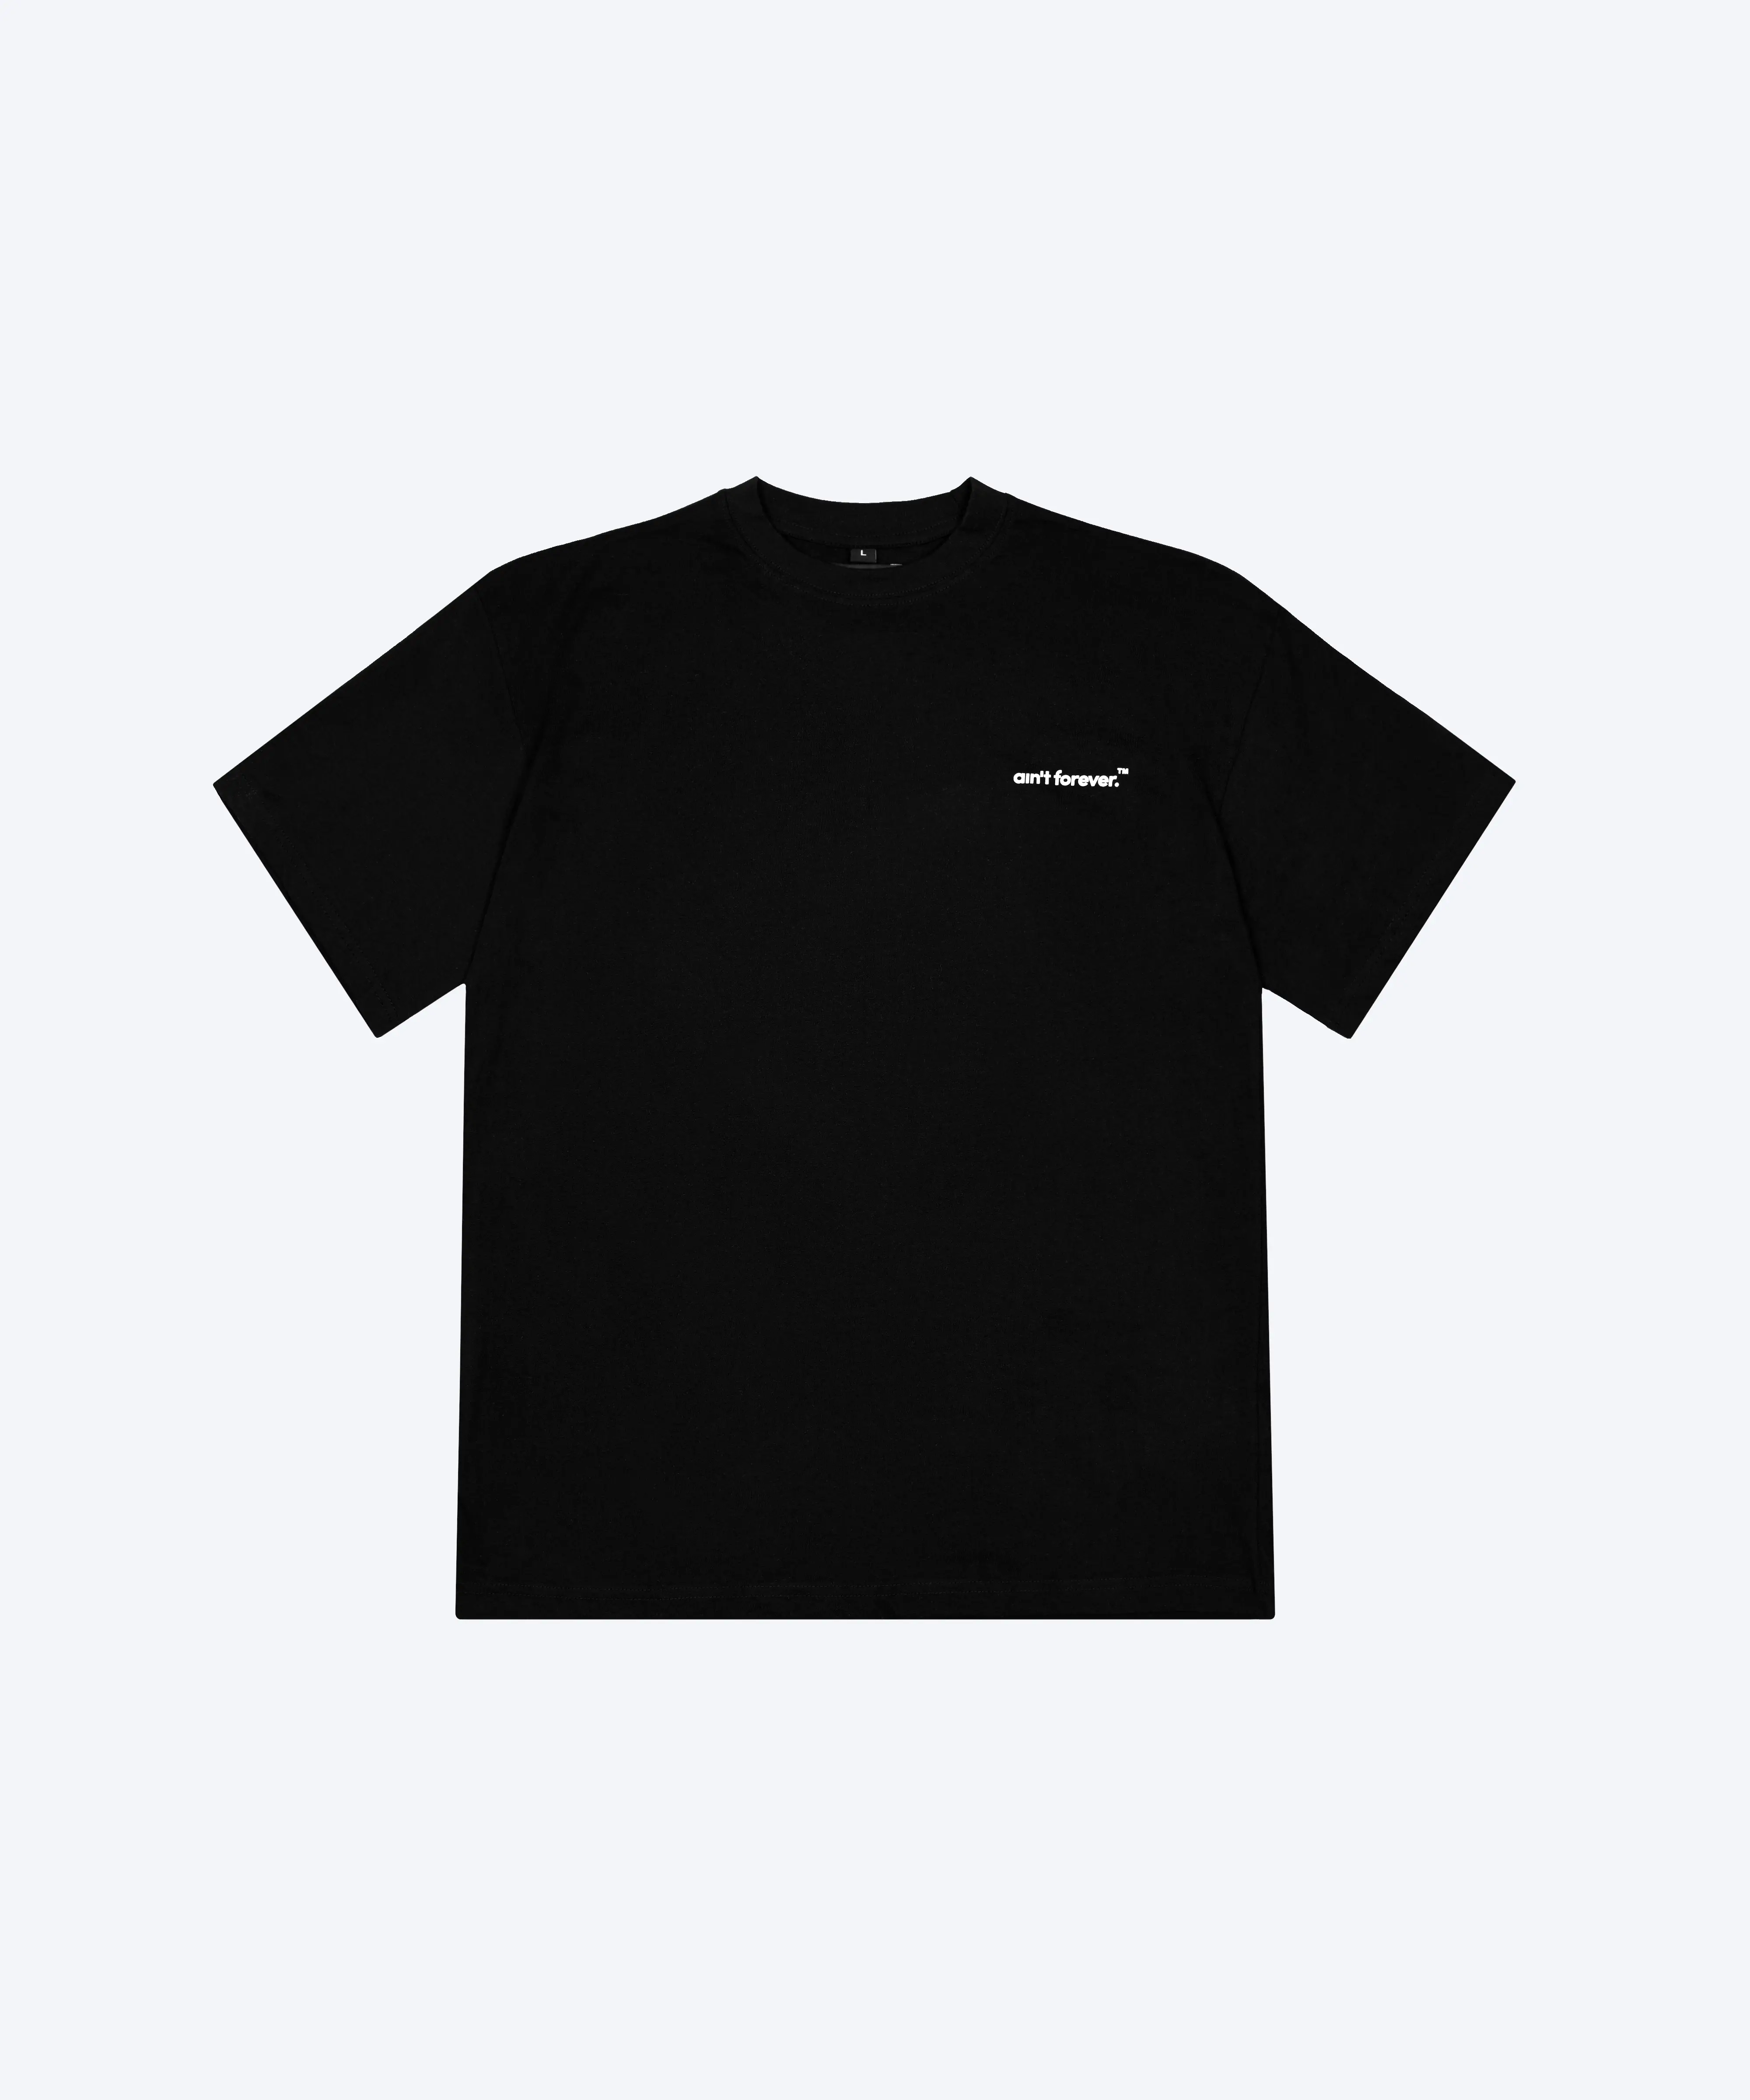 THE OVERSIZED BOARDING PASS T-SHIRT (BLACK / PASTEL BLUE / RED)